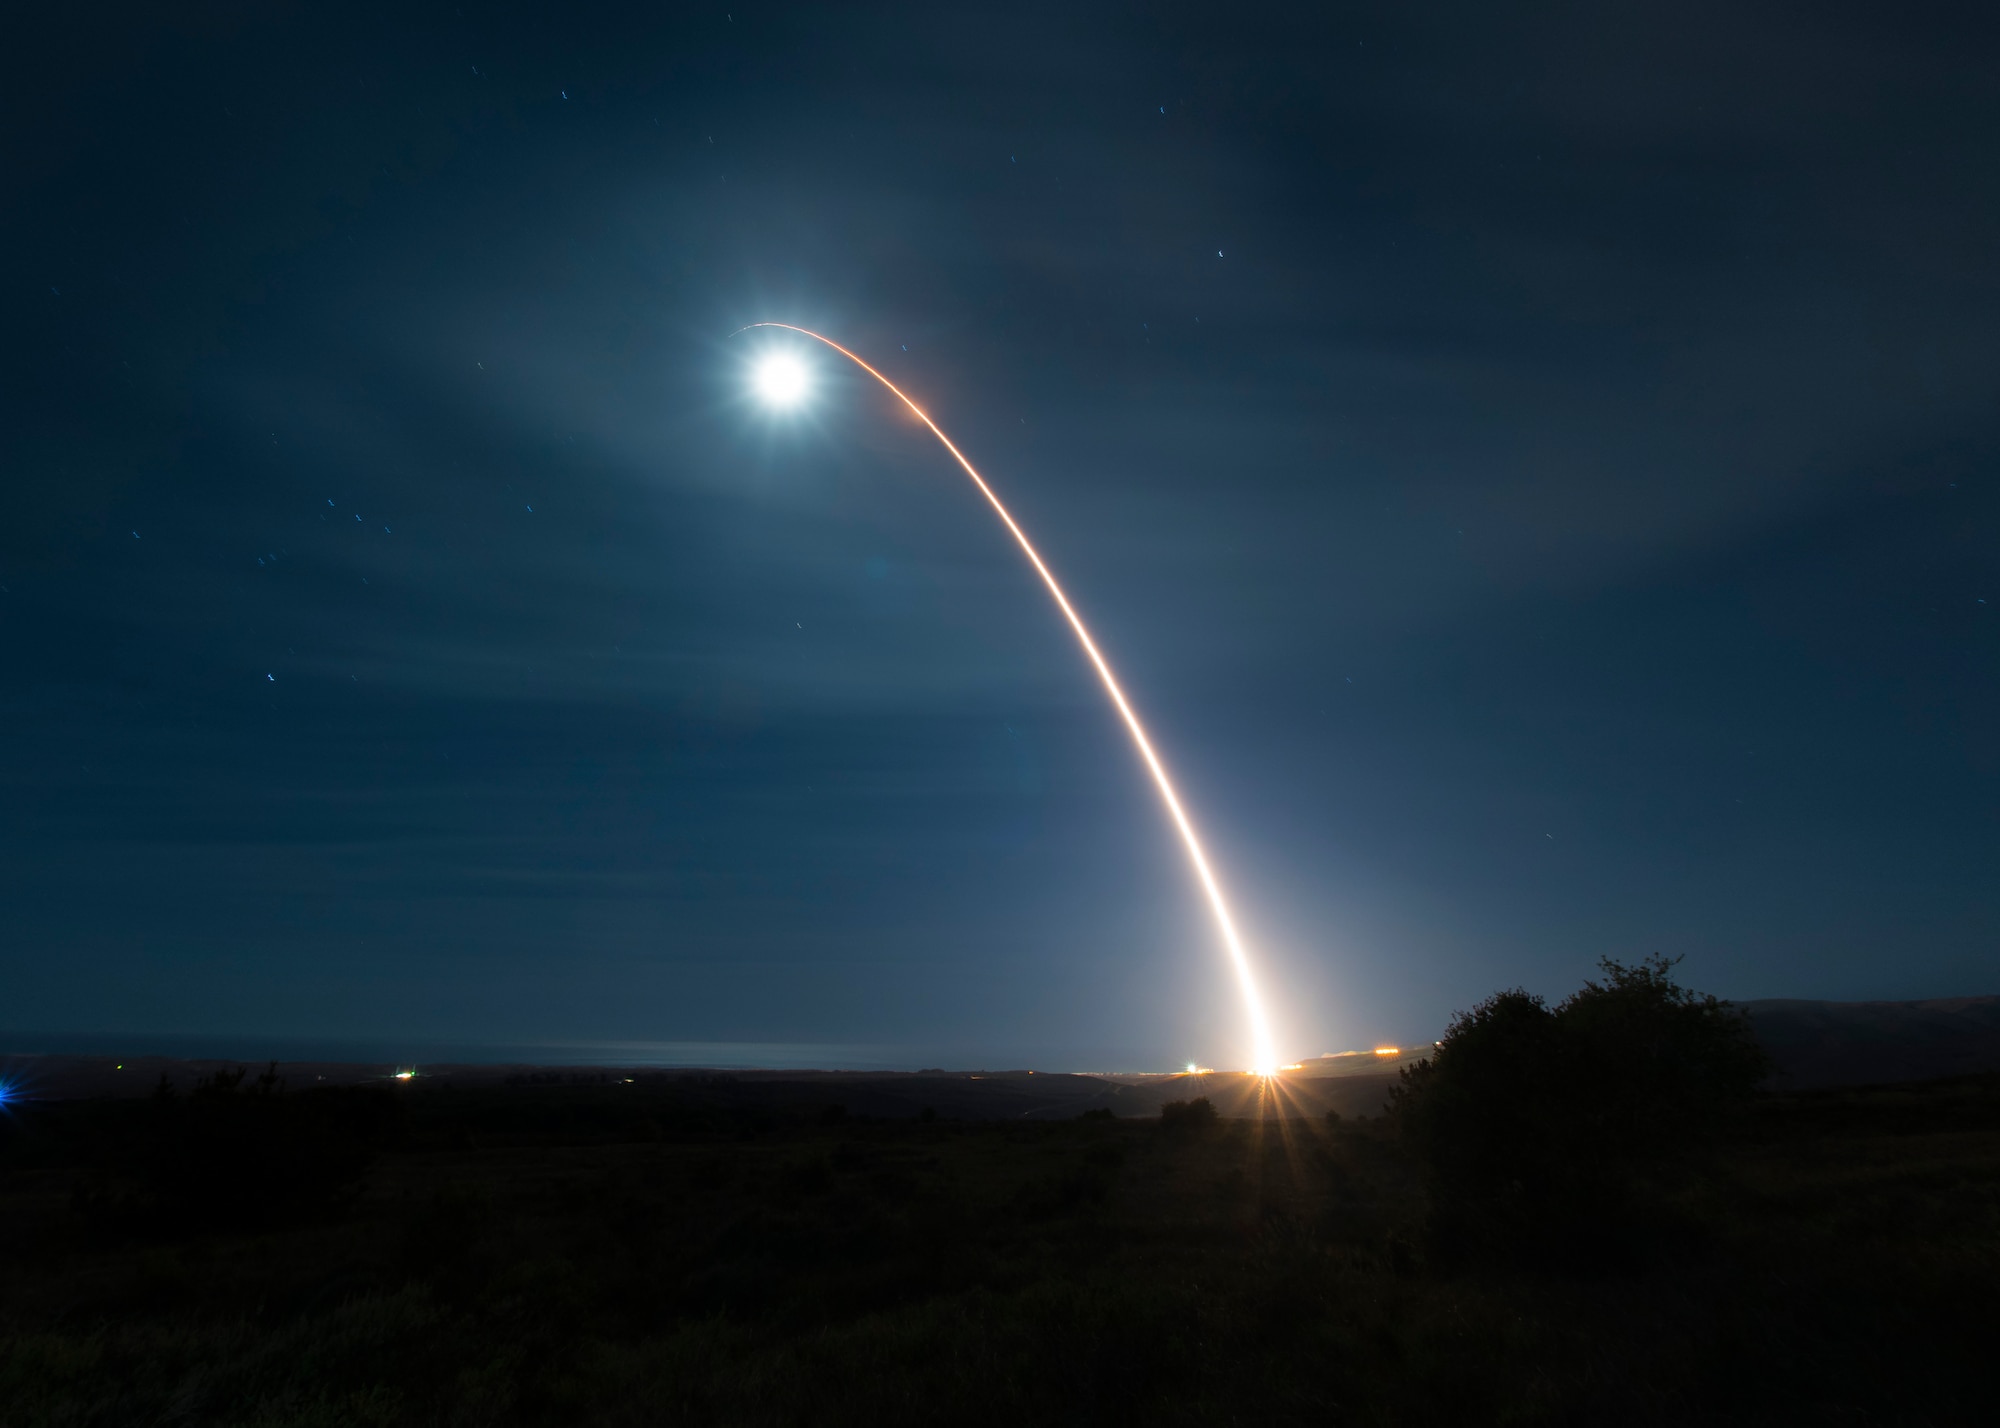 An unarmed Minuteman III intercontinental ballistic missile launches during a developmental test at 12:33 a.m. Pacific Time Wednesday, Feb. 5, 2020, at Vandenberg Air Force Base, Calif. (U.S. Air Force photo by Senior Airman Clayton Wear)